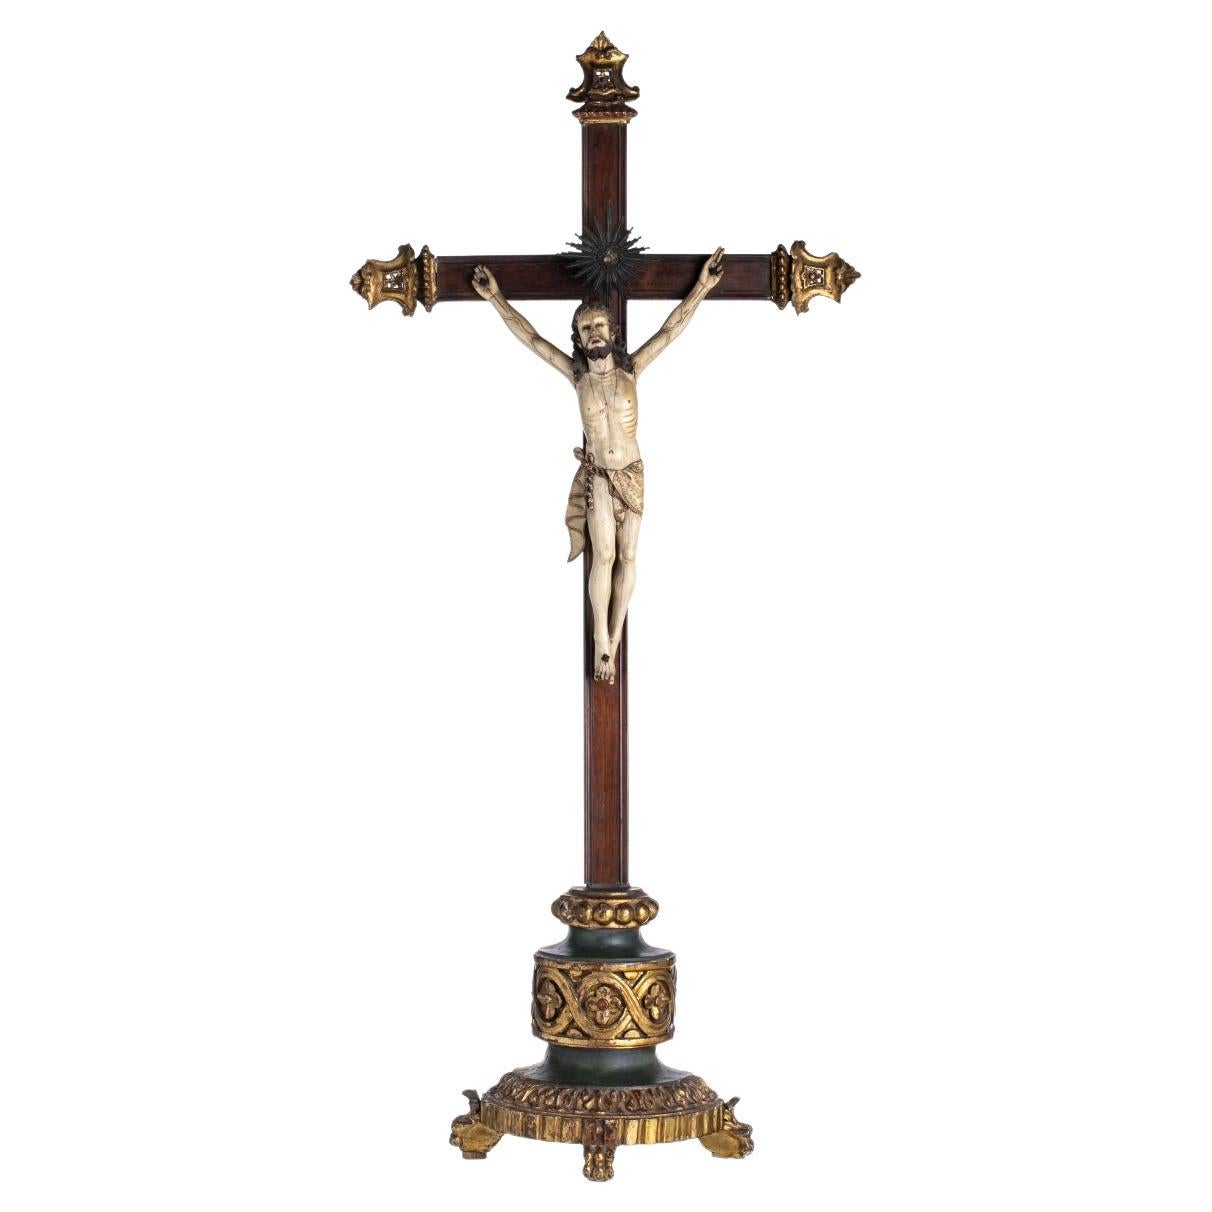 JESUS CHRIST CRUCIFIED  Indo-Portuguese sculpture from the 18th Century